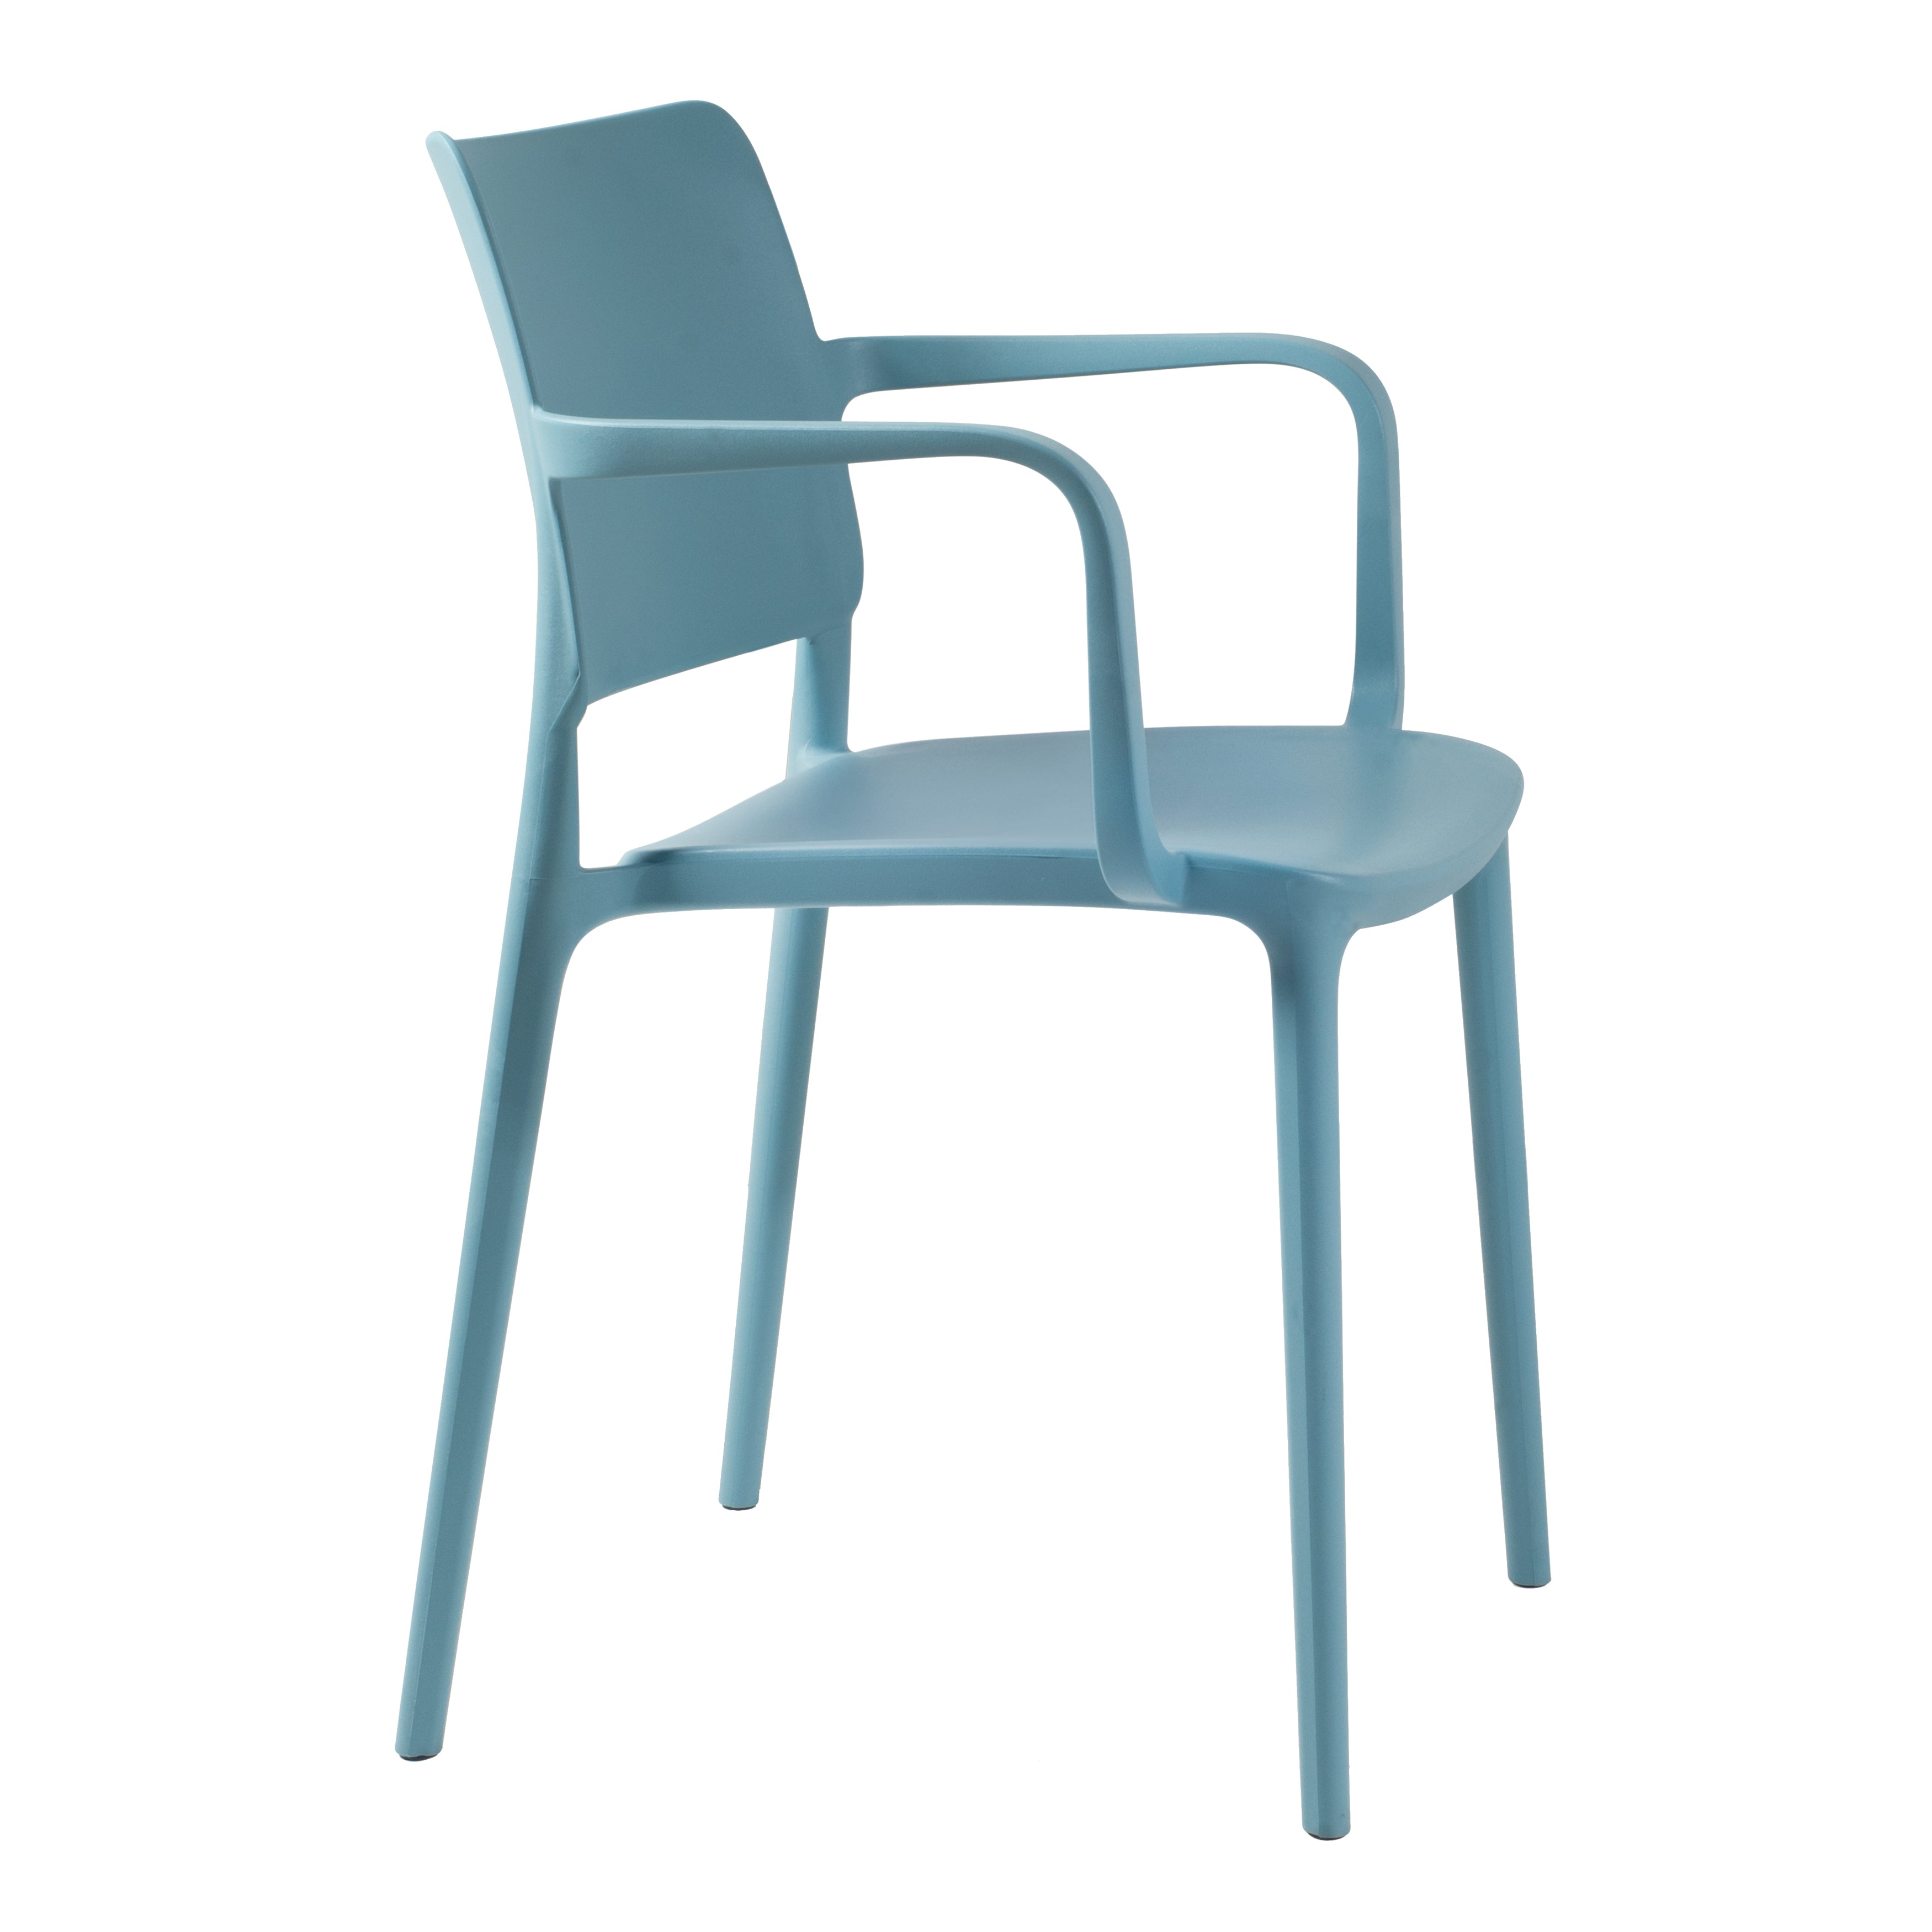 Cleo Arm Patio Dining Chair in Aqua Blue - (Set of 2)